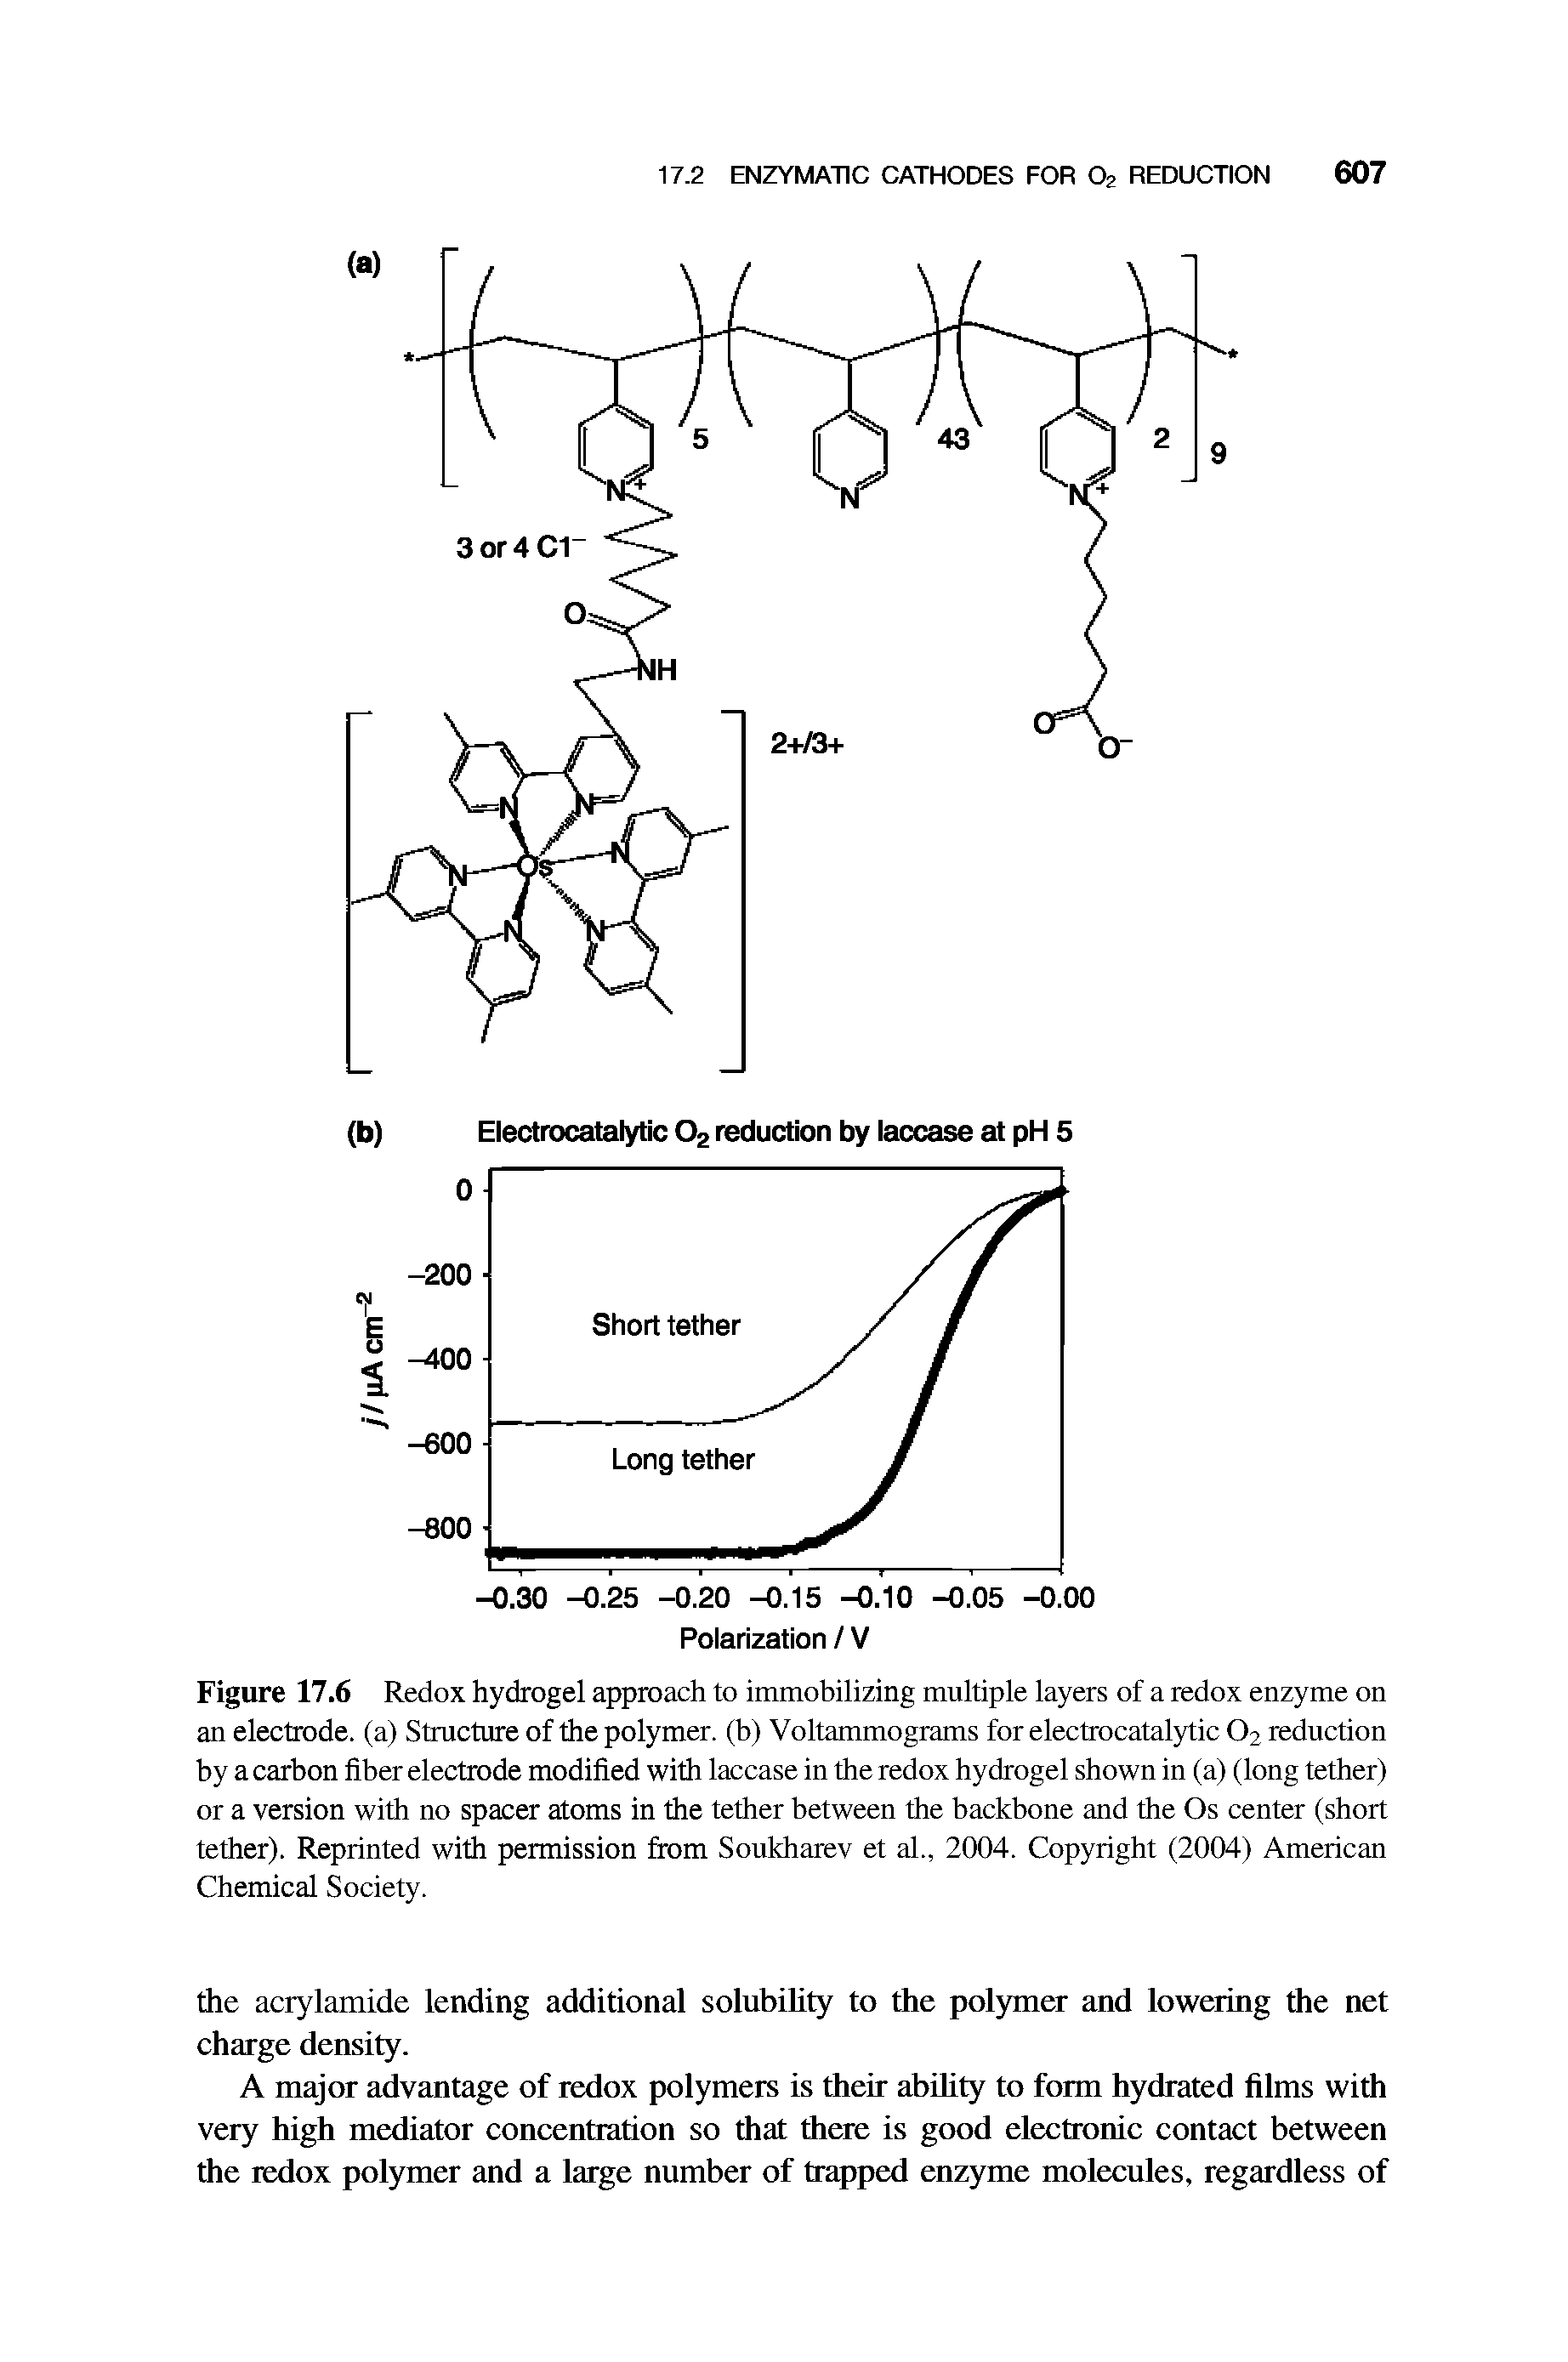 Figure 17.6 Redox hydrogel approach to immobilizing multiple layers of a redox enzyme on an electrode, (a) Structure of the polymer, (b) Voltammograms for electrocatalytic O2 reduction by a carbon fiber electrode modified with laccase in the redox hydrogel shown in (a) (long tether) or a version with no spacer atoms in the tether between the backbone and the Os center (short tether). Reprinted with permission fi om Soukharev et al., 2004. Copyright (2004) American Chemical Society.